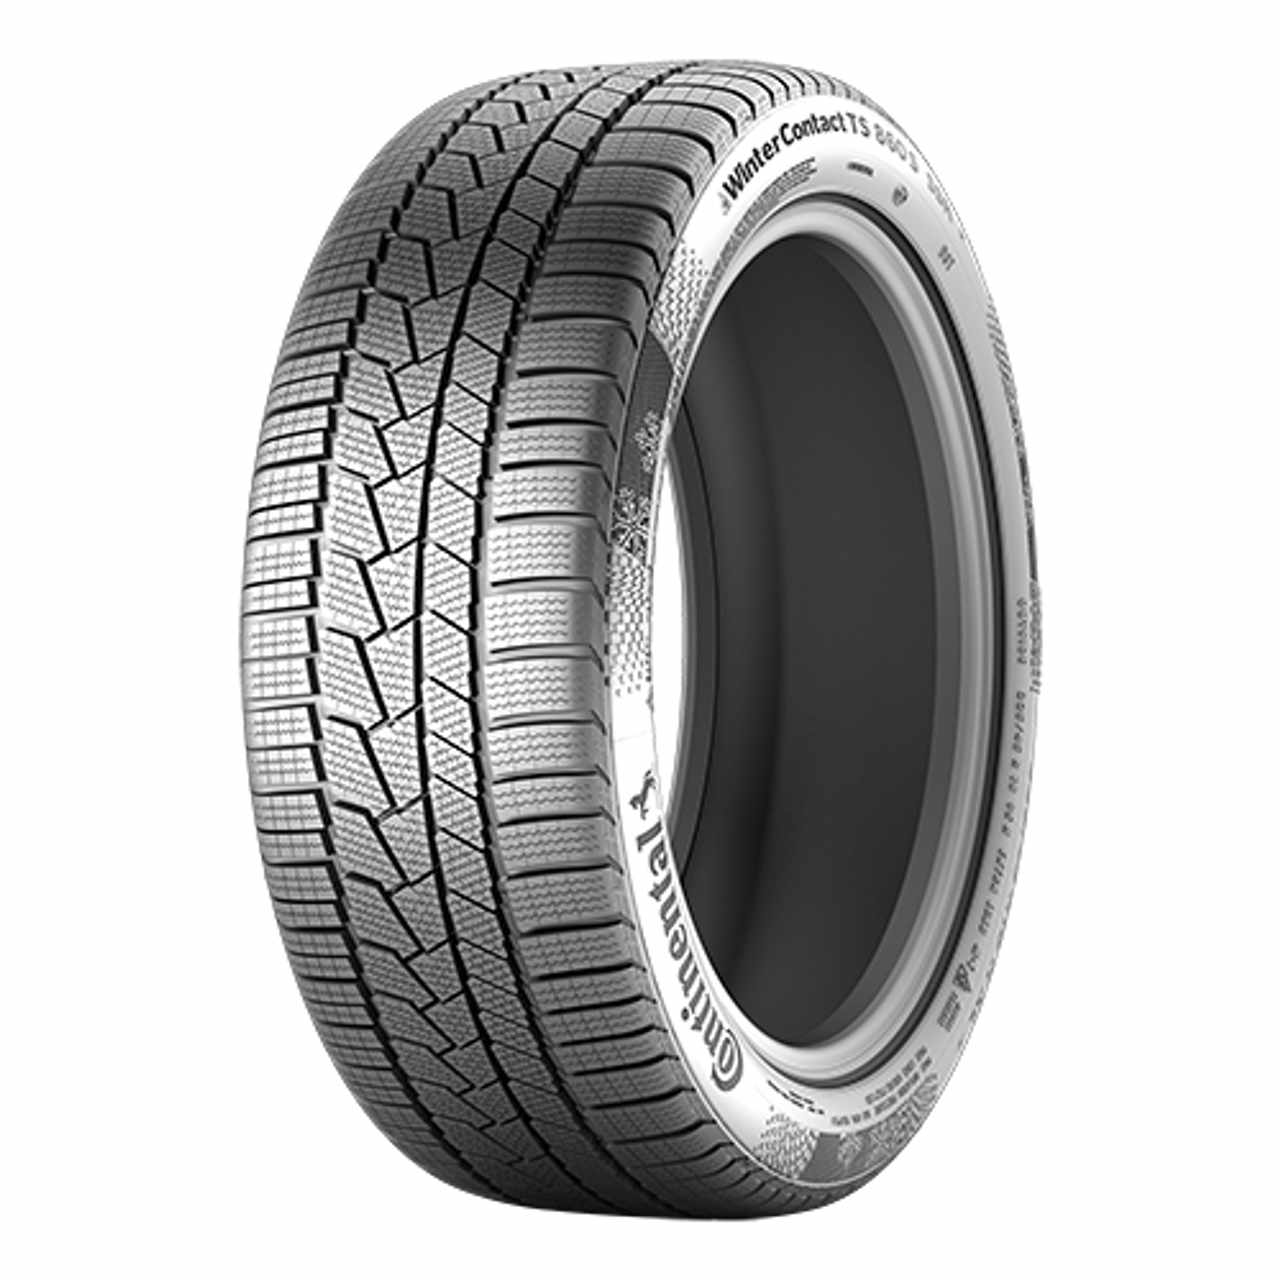 CONTINENTAL WINTERCONTACT TS 860 S (*) (EVc) 205/60R16 96H BSW XL